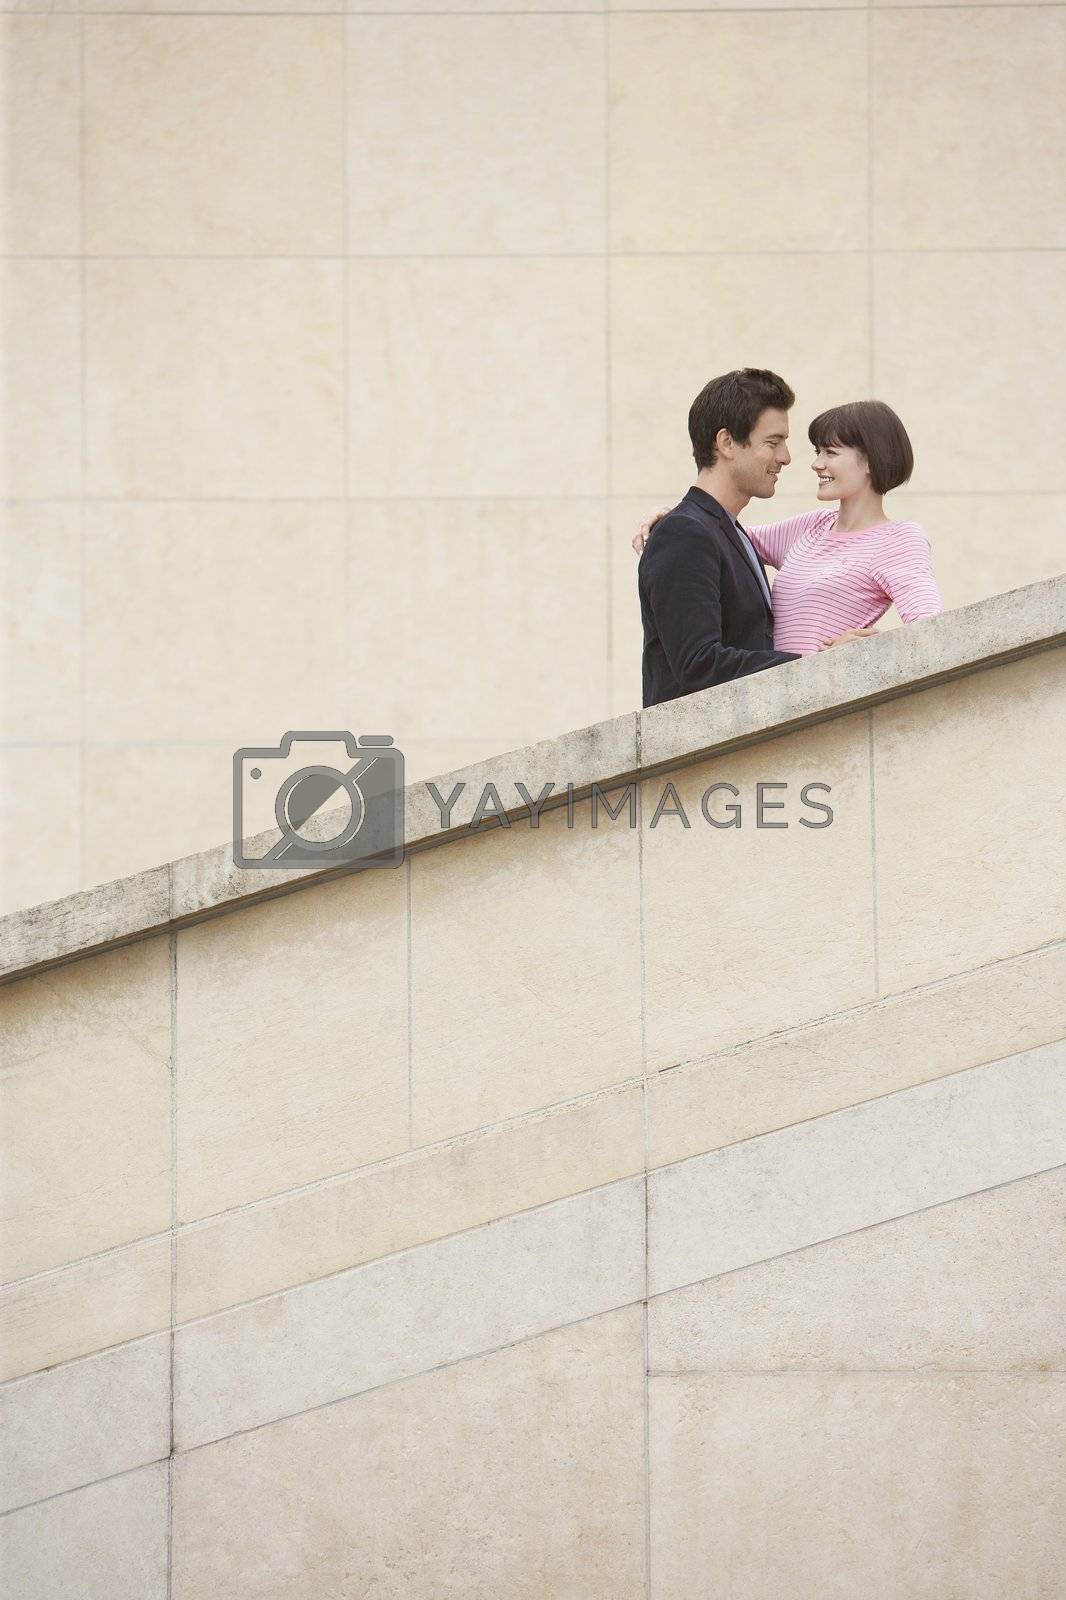 Royalty free image of Couple Embracing on Stairway by moodboard